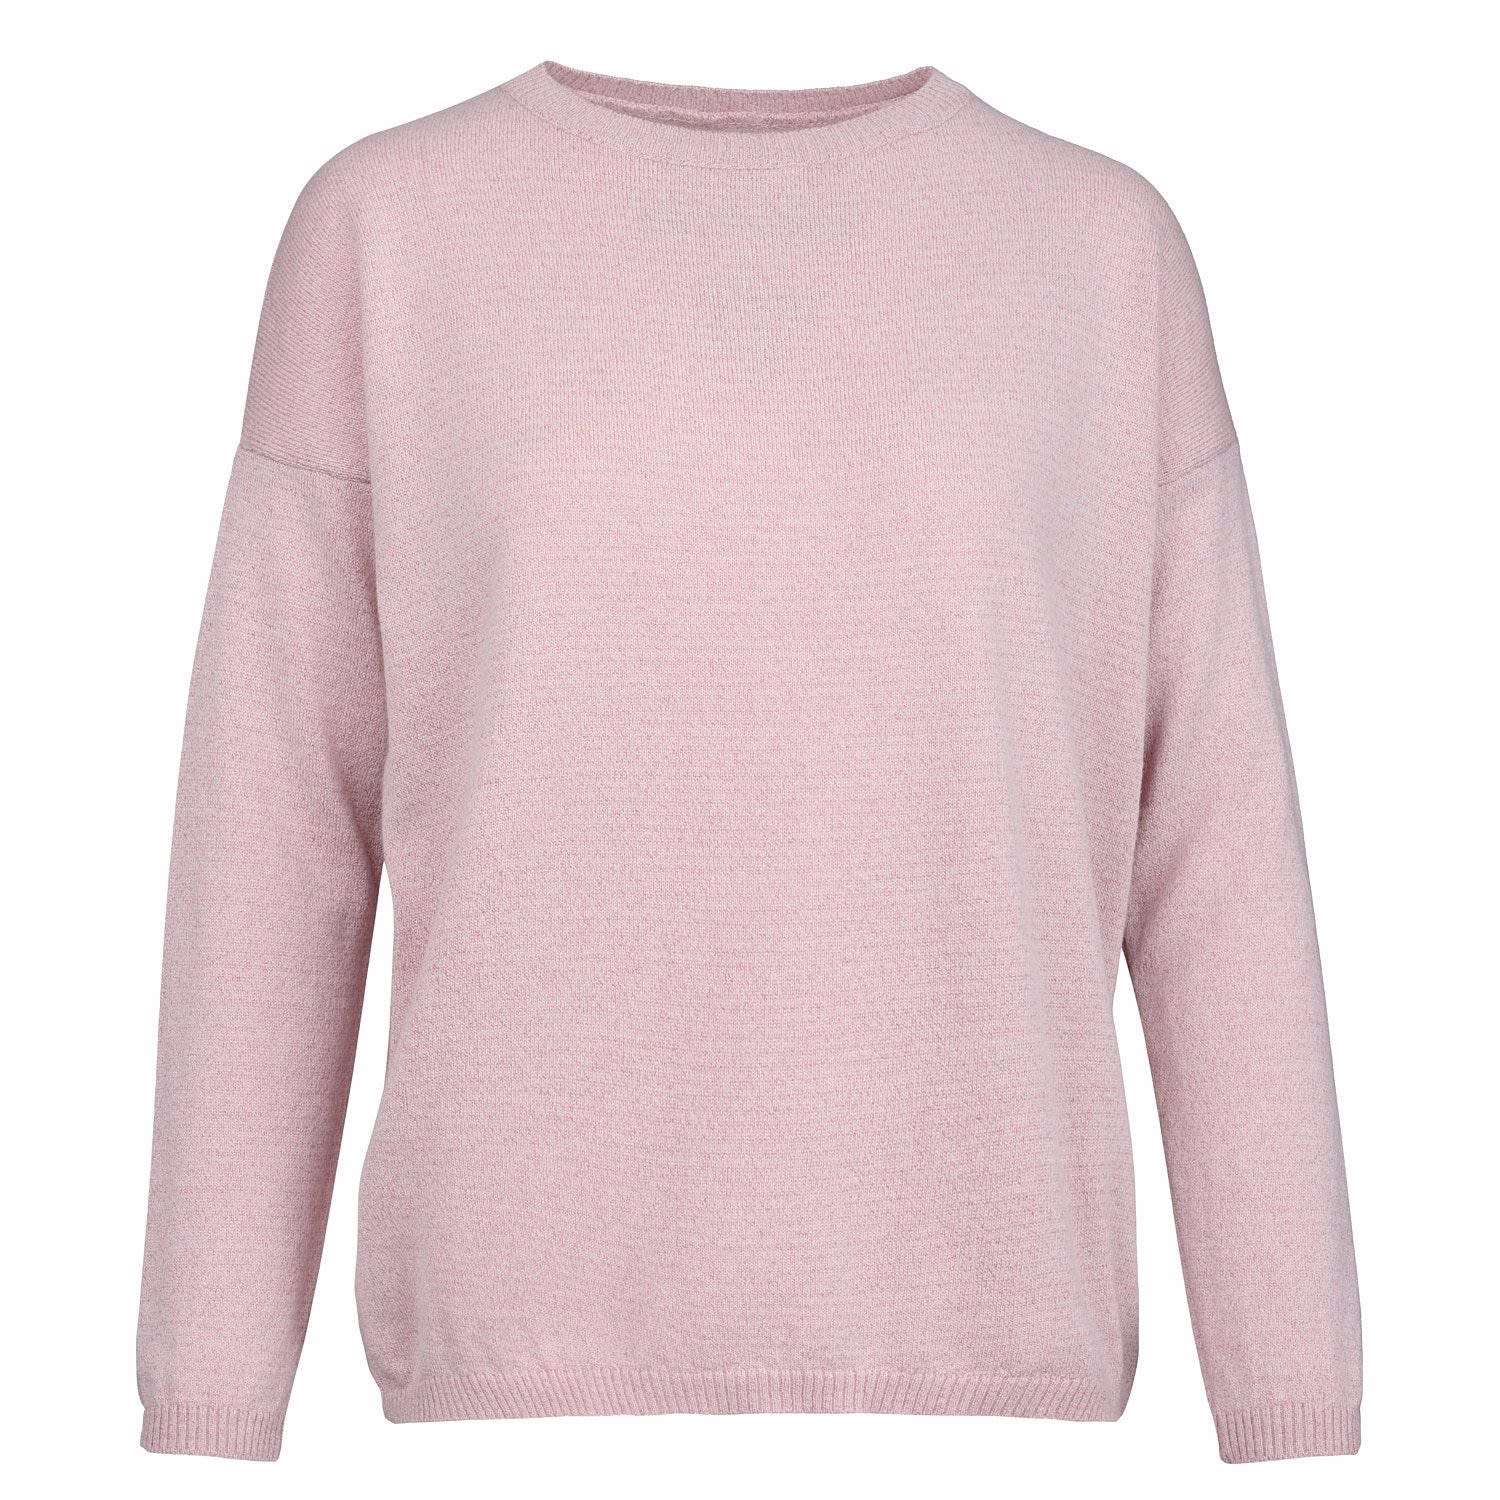 Women’s Pink / Purple Cashmere Sparkle Sweater In Dusty Pink One Size At Last...